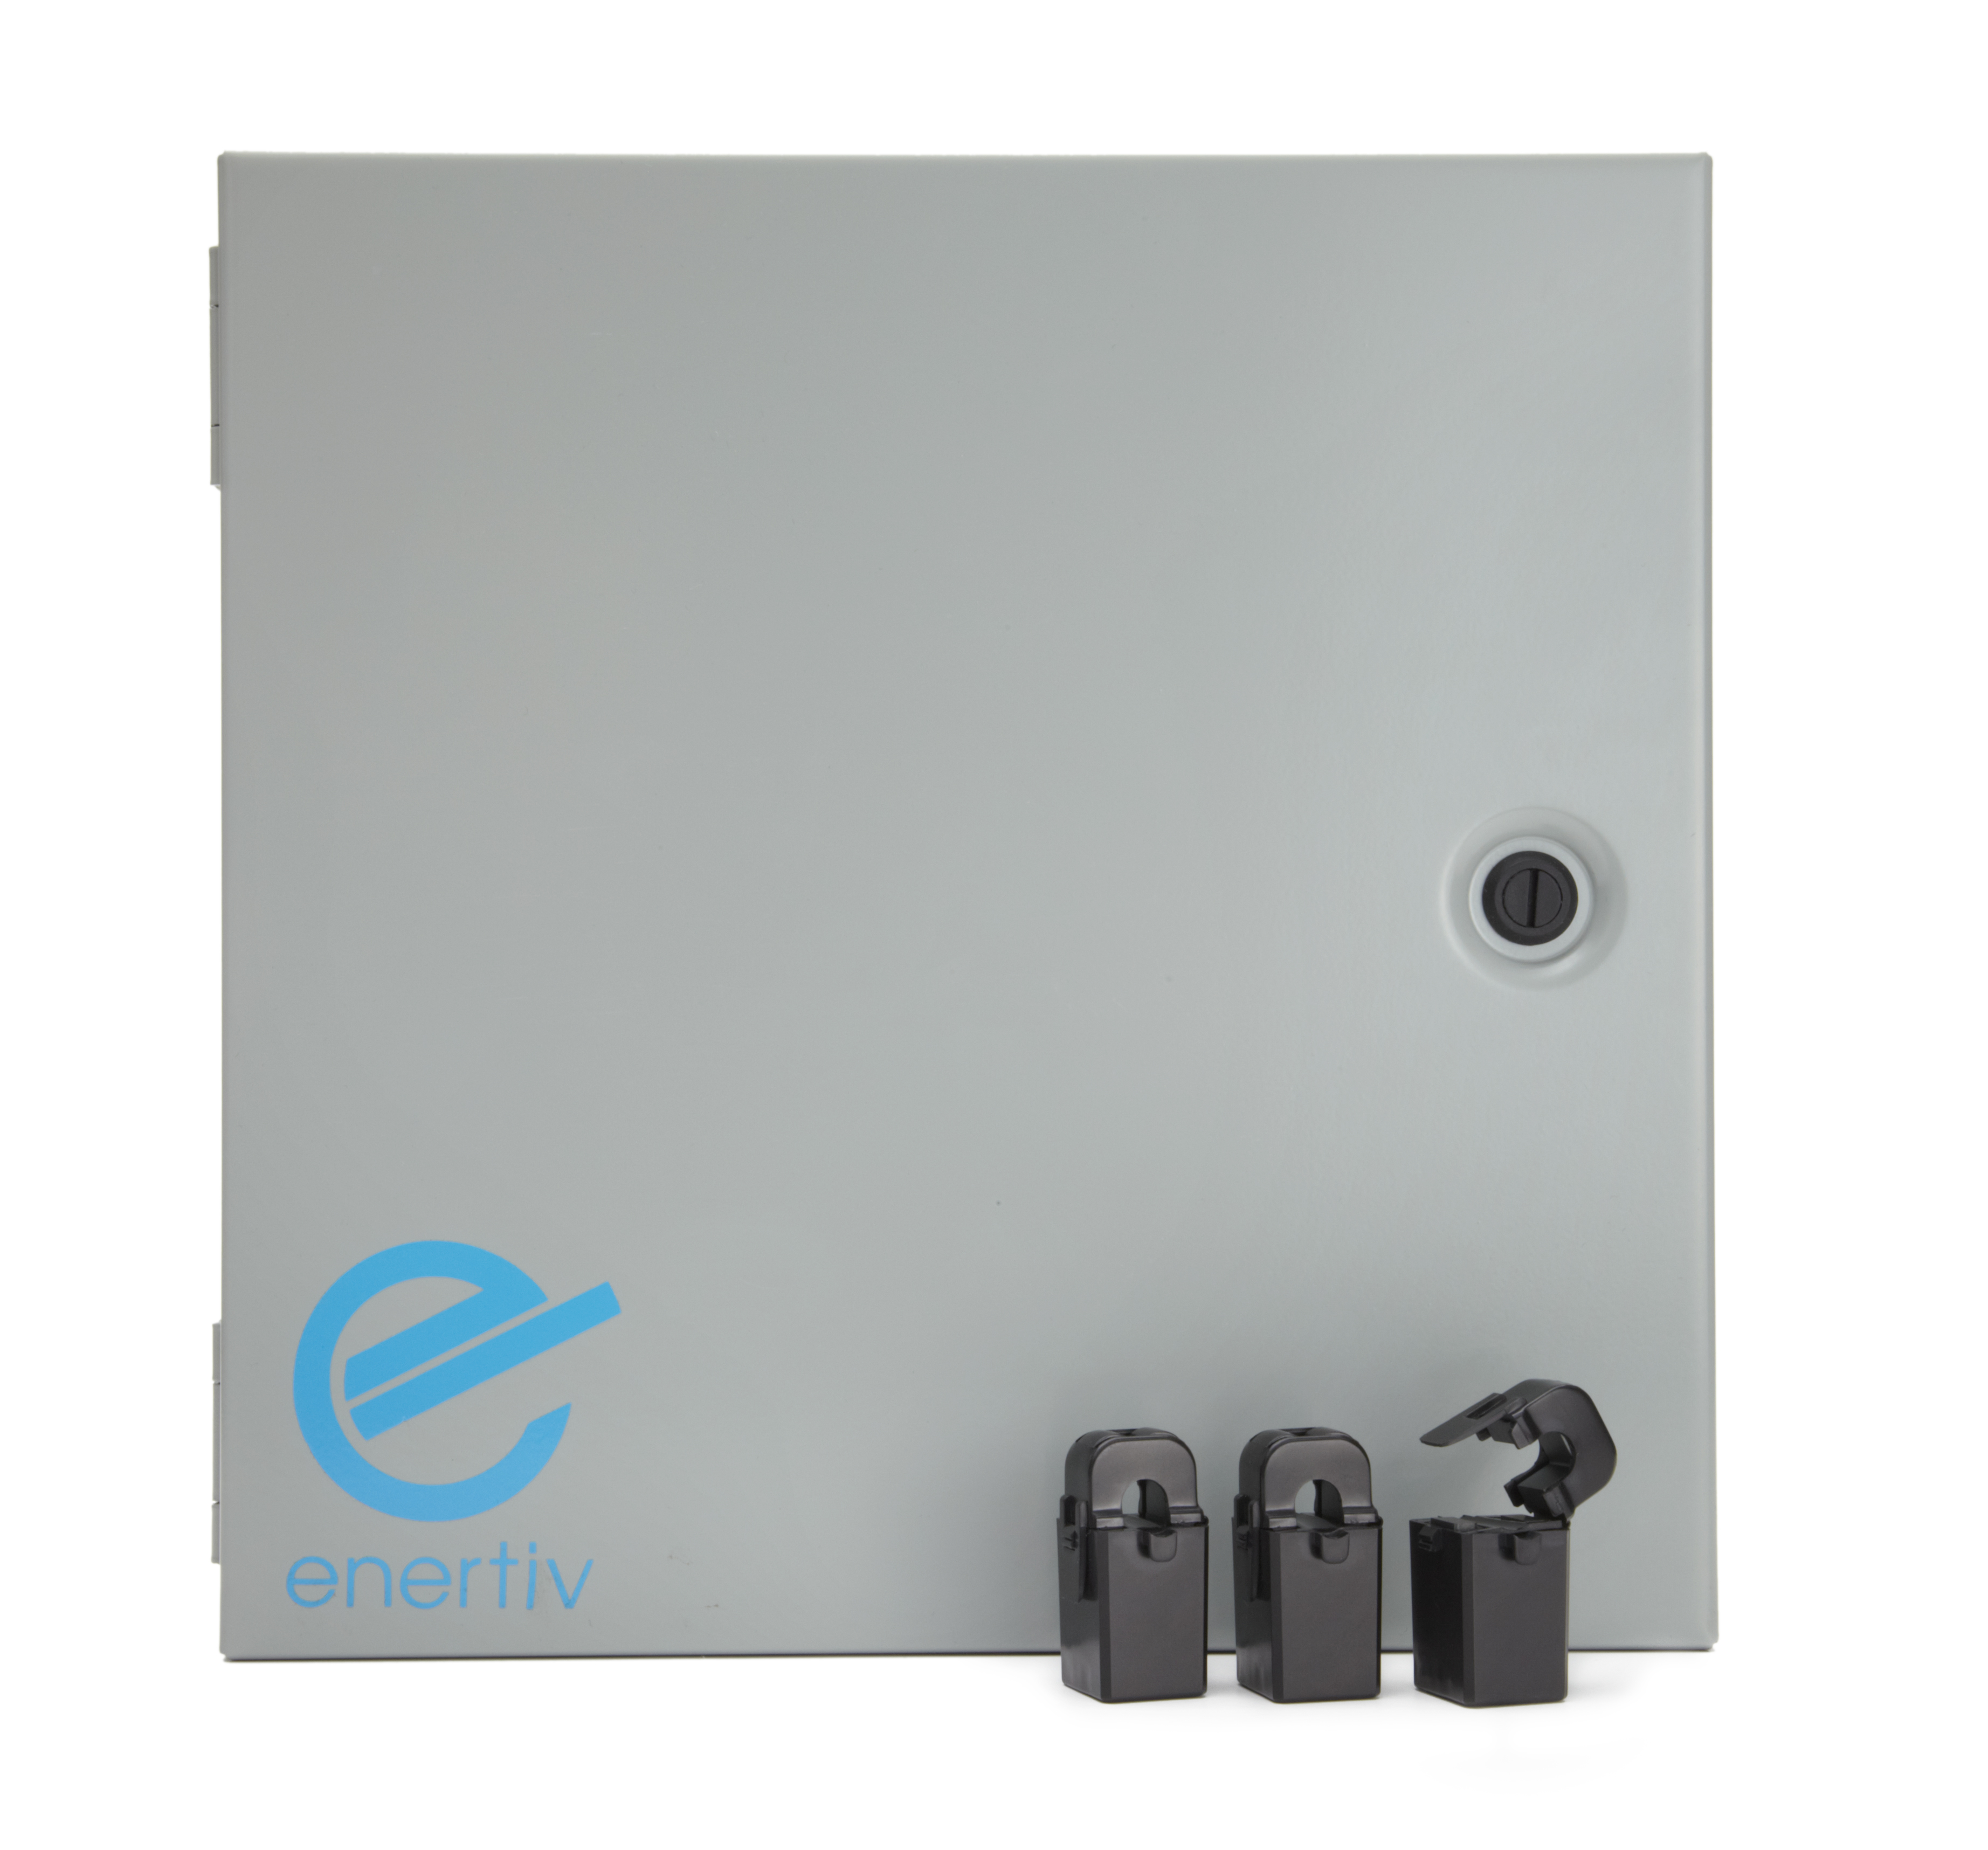 This is the Enertiv hardware that is installed by your breaker box.